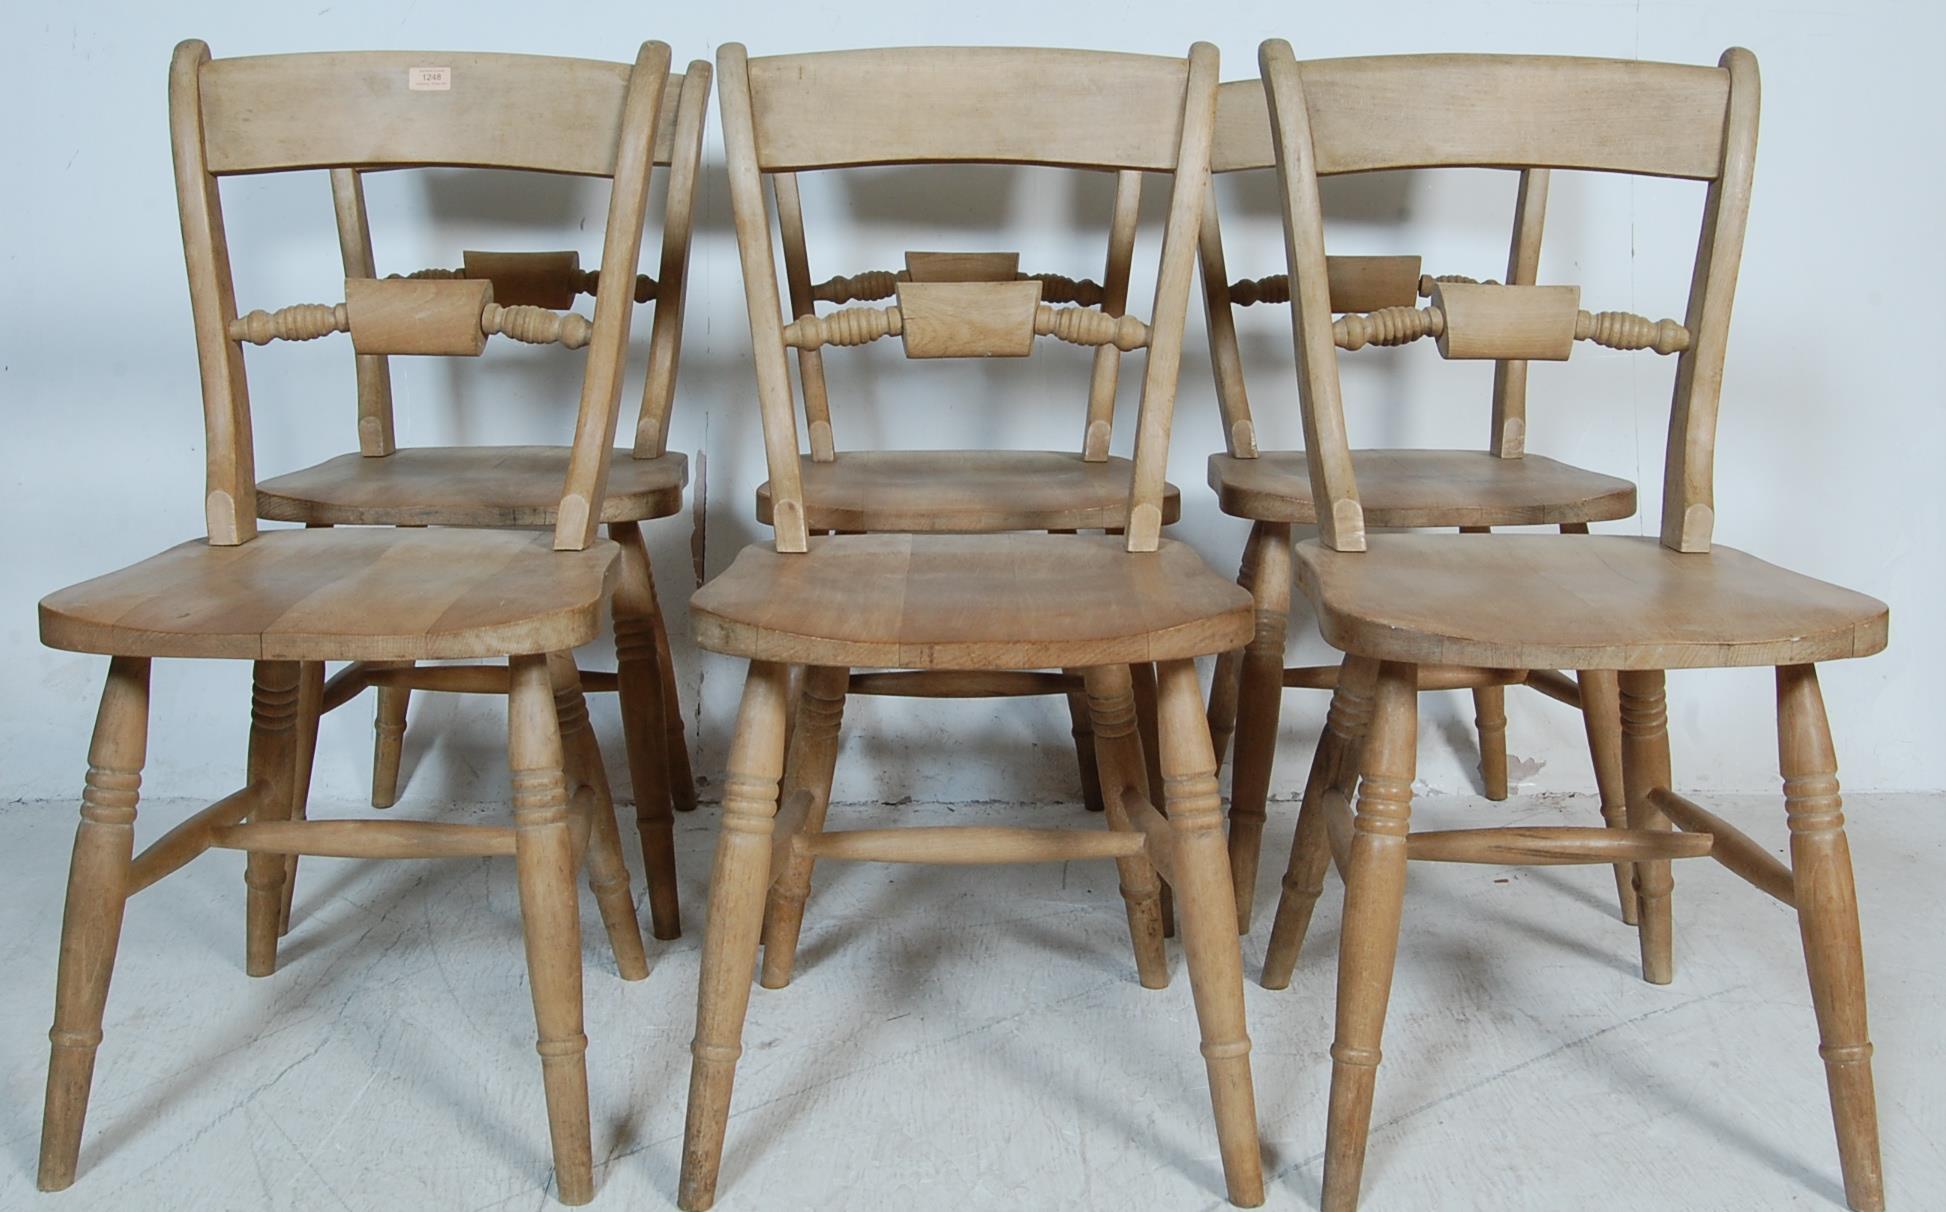 SIX VICTORIAN STYLE DINING CHAIRS